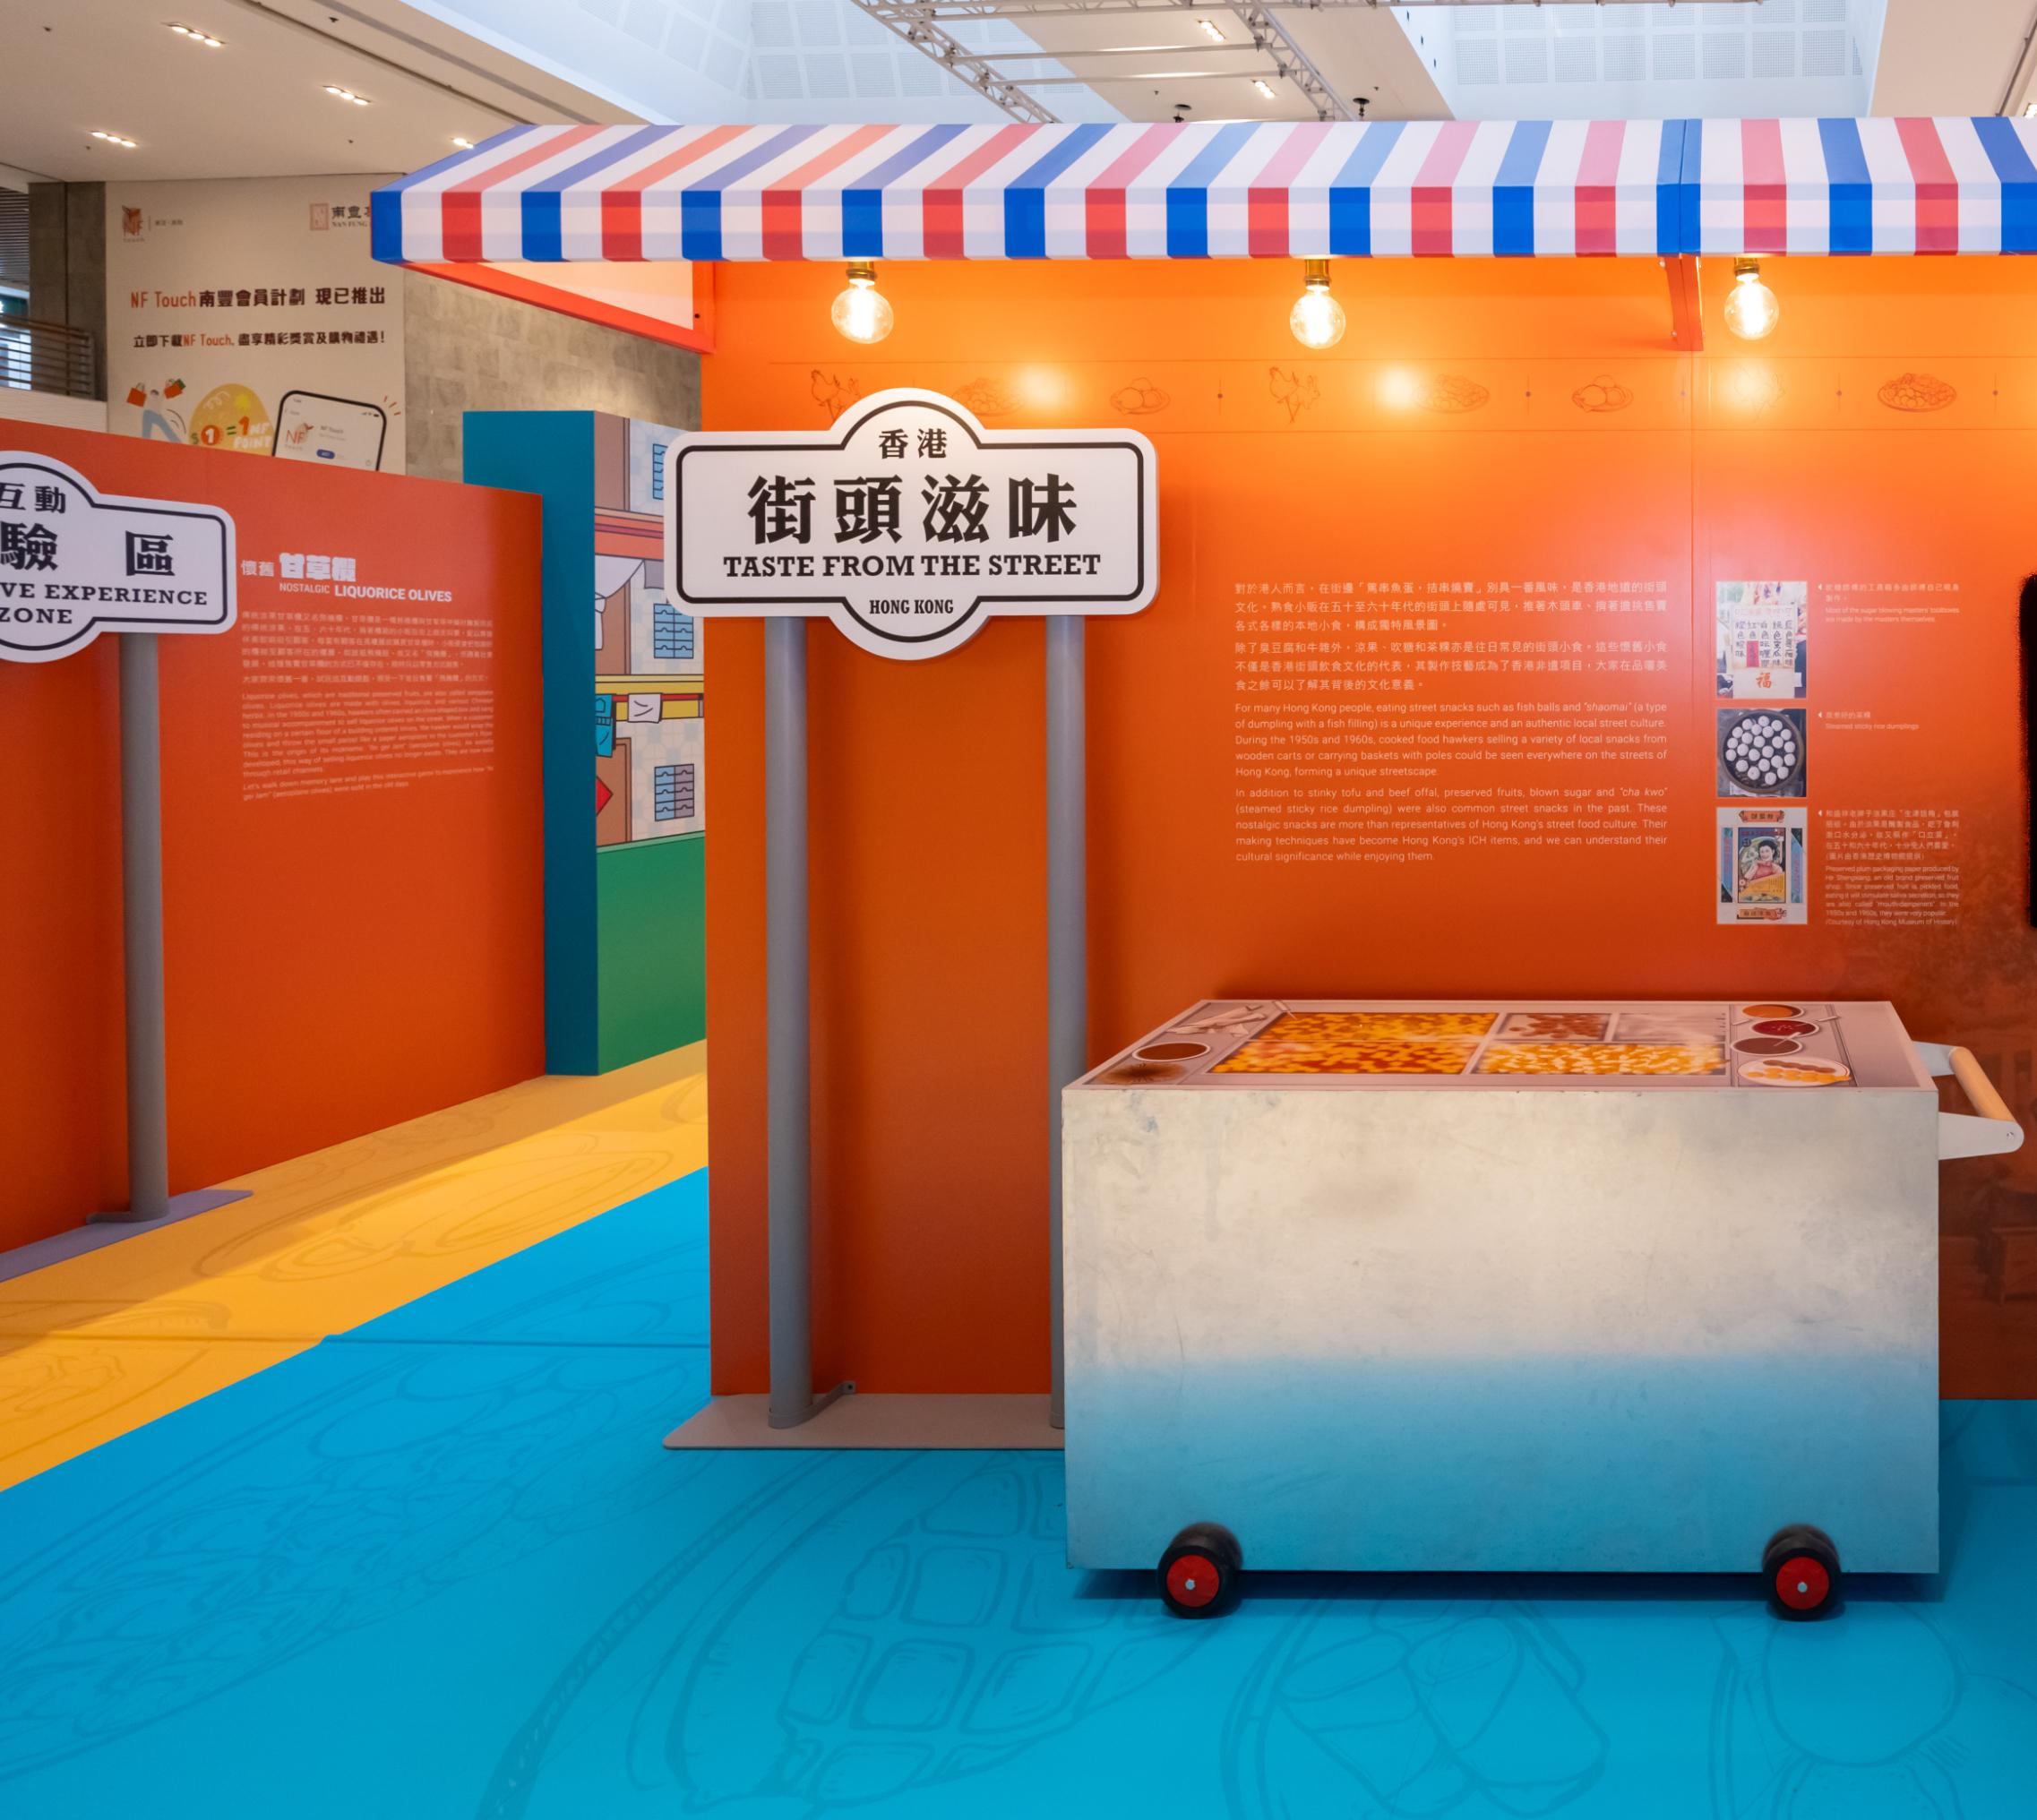 The Intangible Cultural Heritage (ICH) Office launched today (January 4) a roving exhibition titled "Taste of Intangible Cultural Heritage". Photo shows the "check-in" spot of the exhibition for the public to take photos.